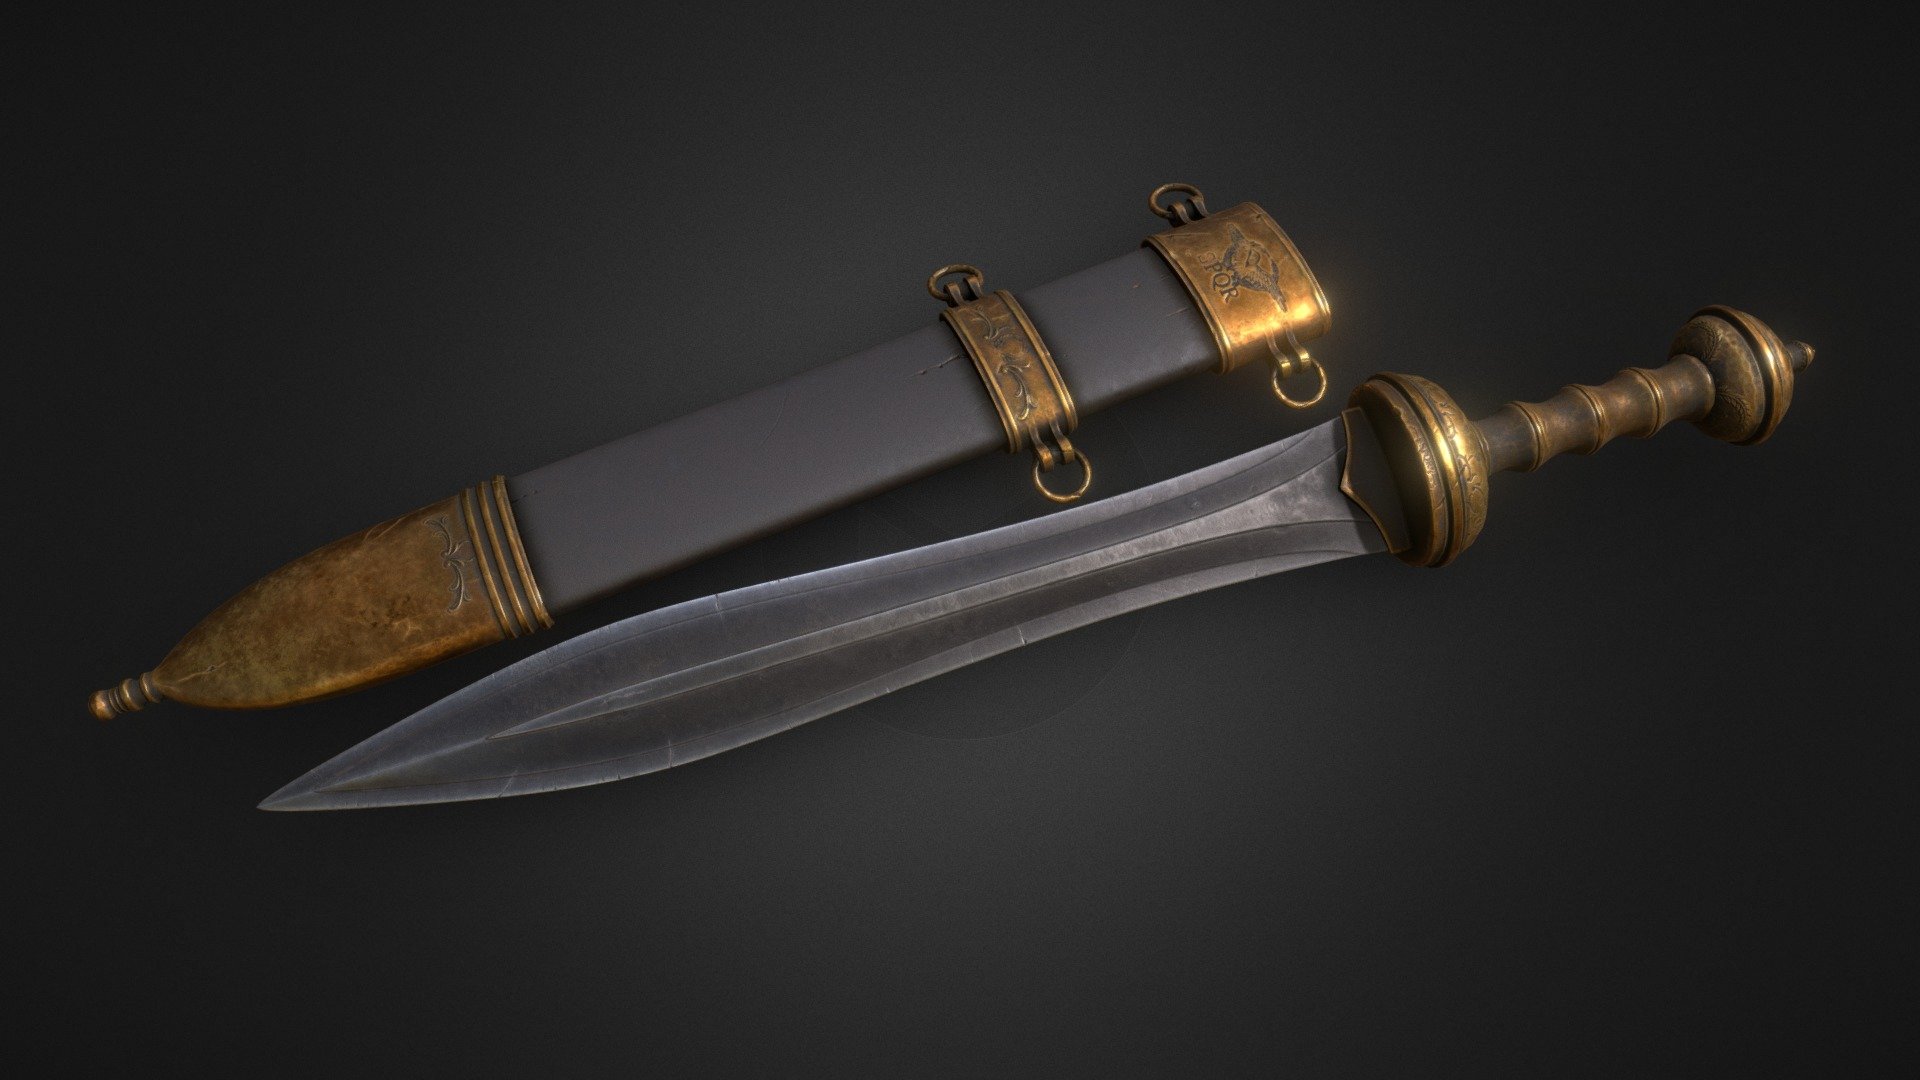 Gladius and sheath low poly model.

2k textures. Total polycount 14590 tris.

Model created on Blender and ZBrush. Textured with Substance Painter 3d model